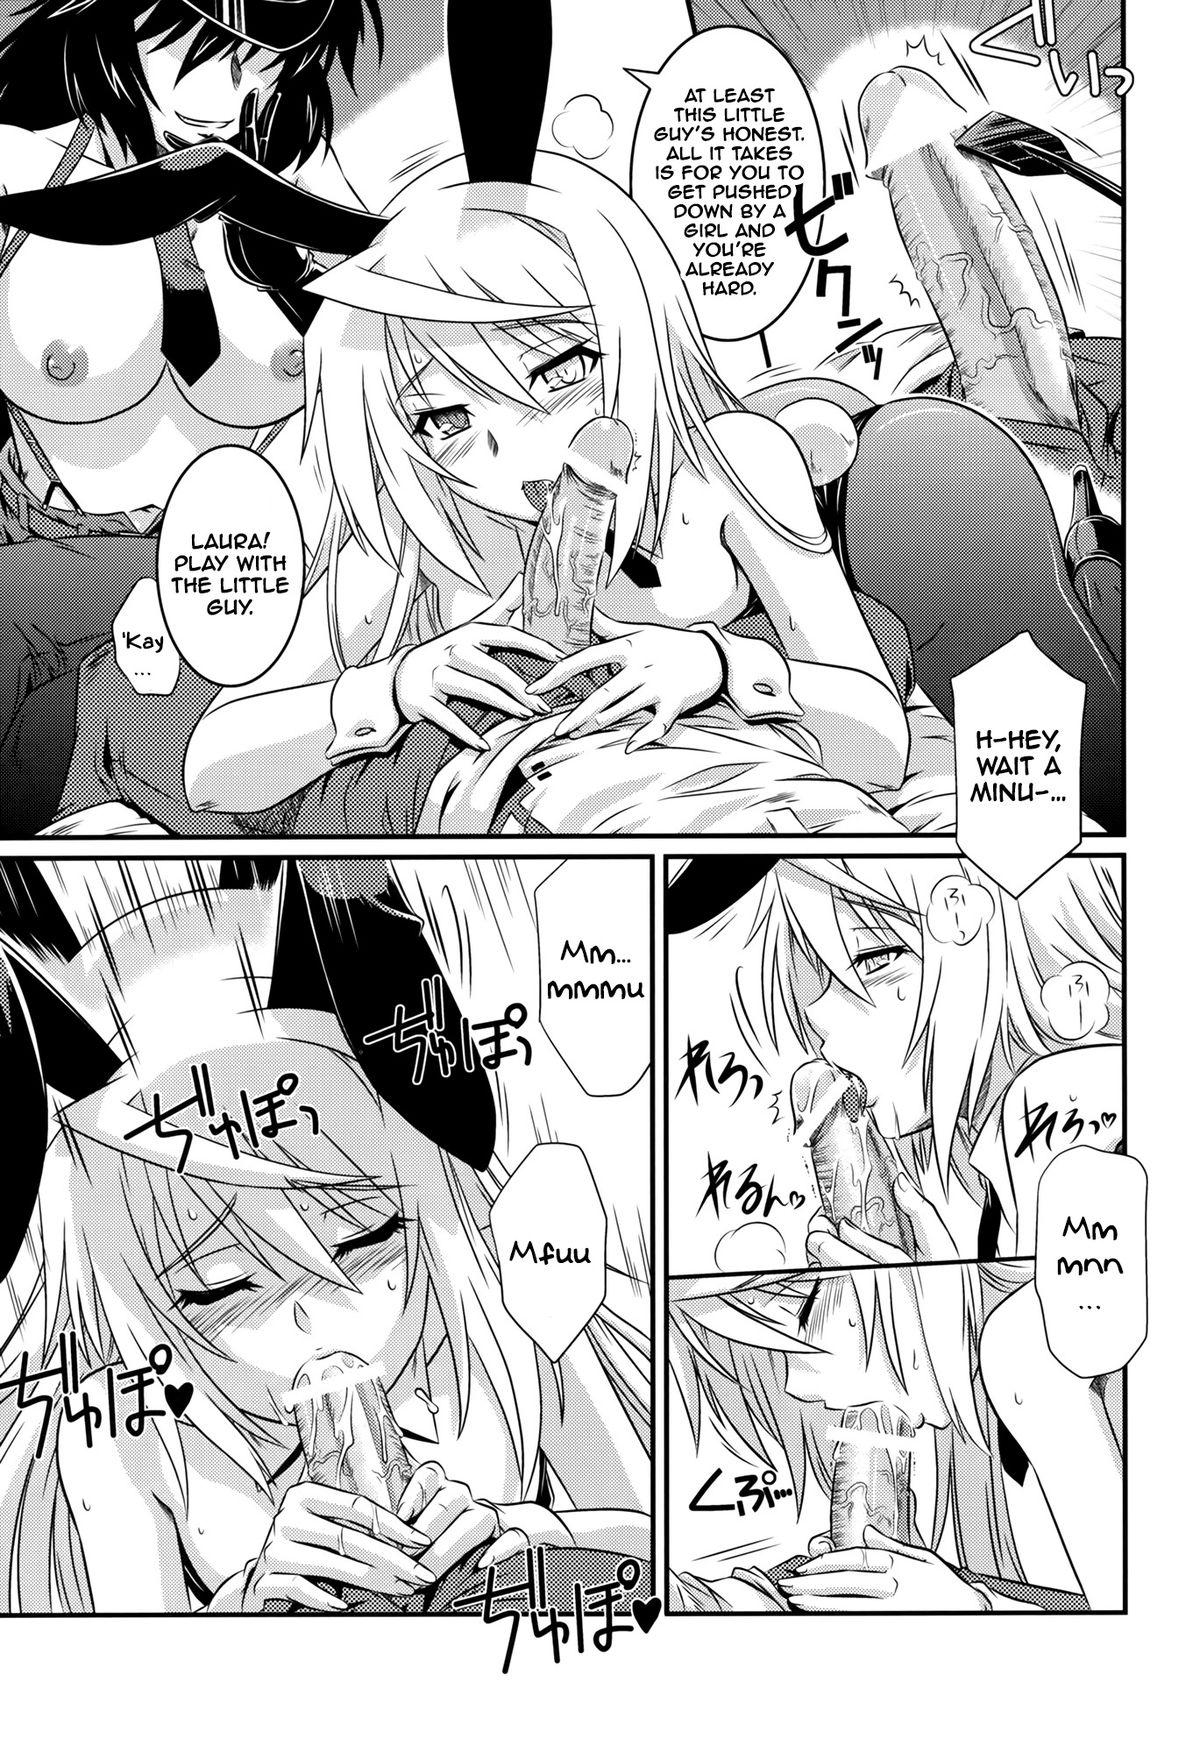 Outdoor Sex is Incest Strategy 4 - Infinite stratos Gayhardcore - Page 6